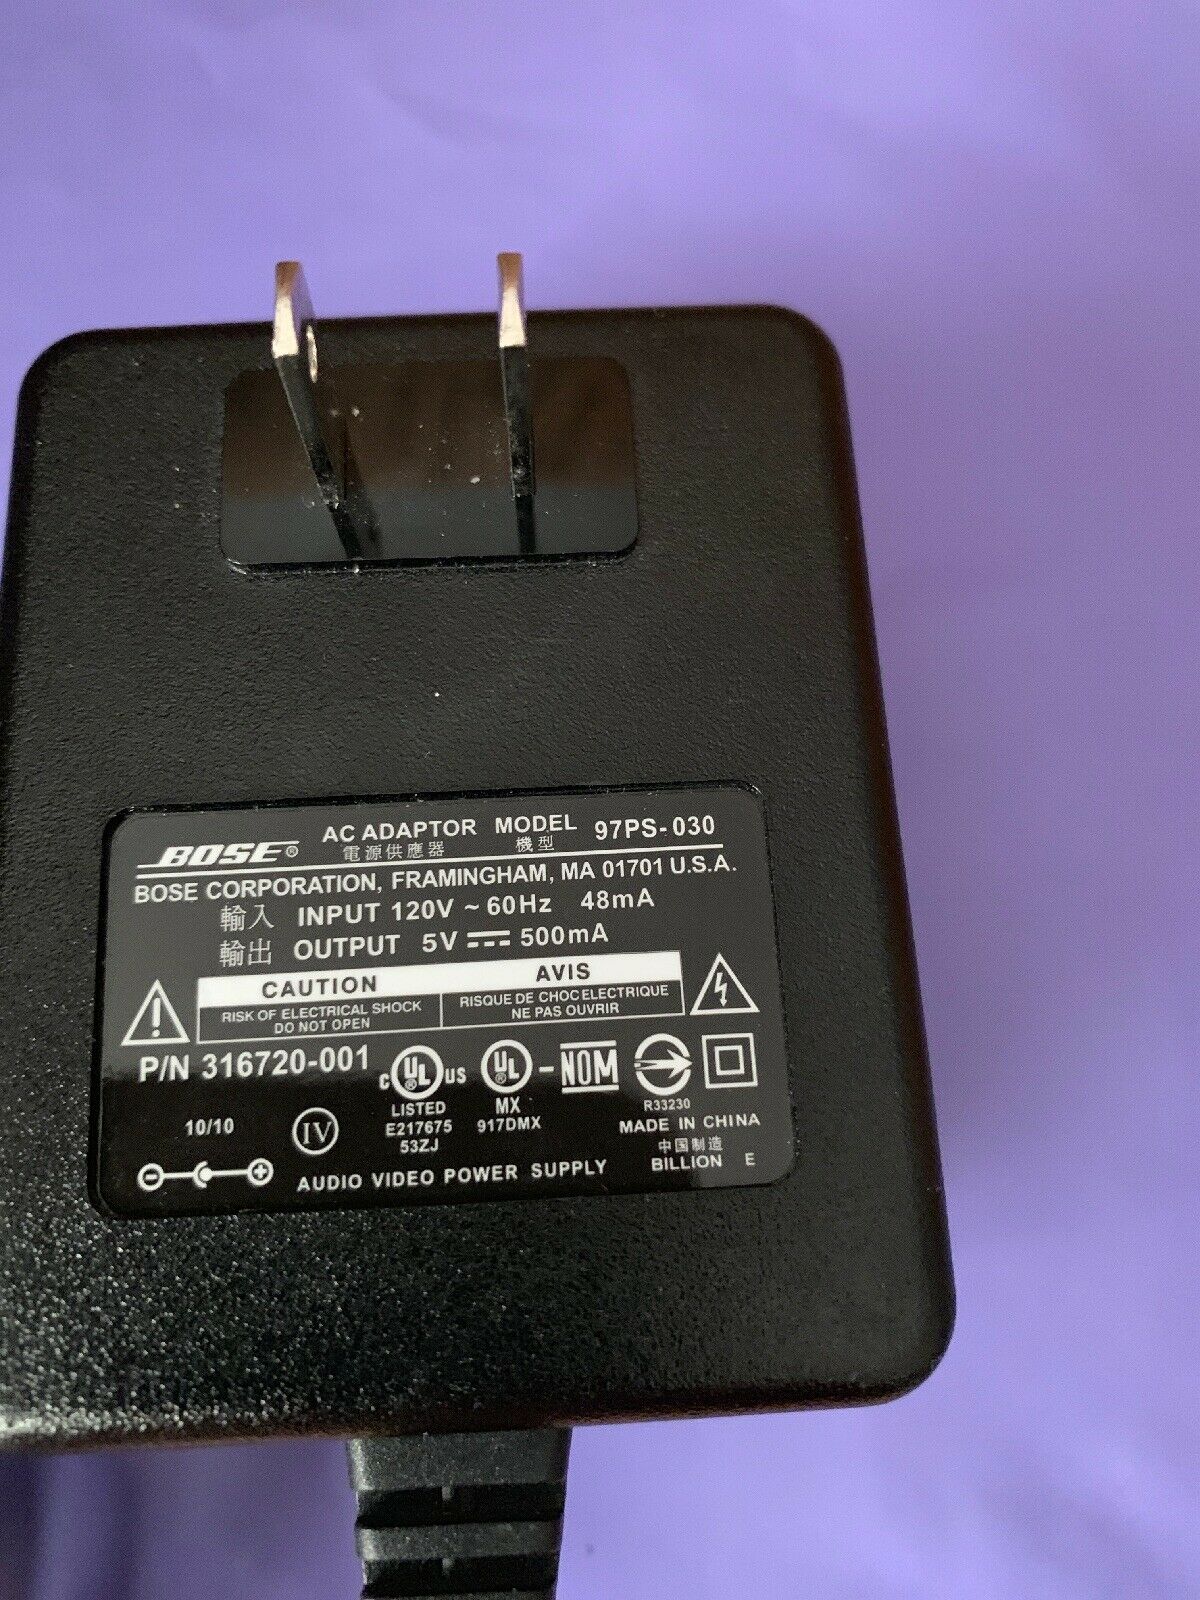 *Brand NEW* 5V 500mA AC DC Adapter BOSE Model 97PS-030 P/N 316720-001 POWER SUPPLY - Click Image to Close